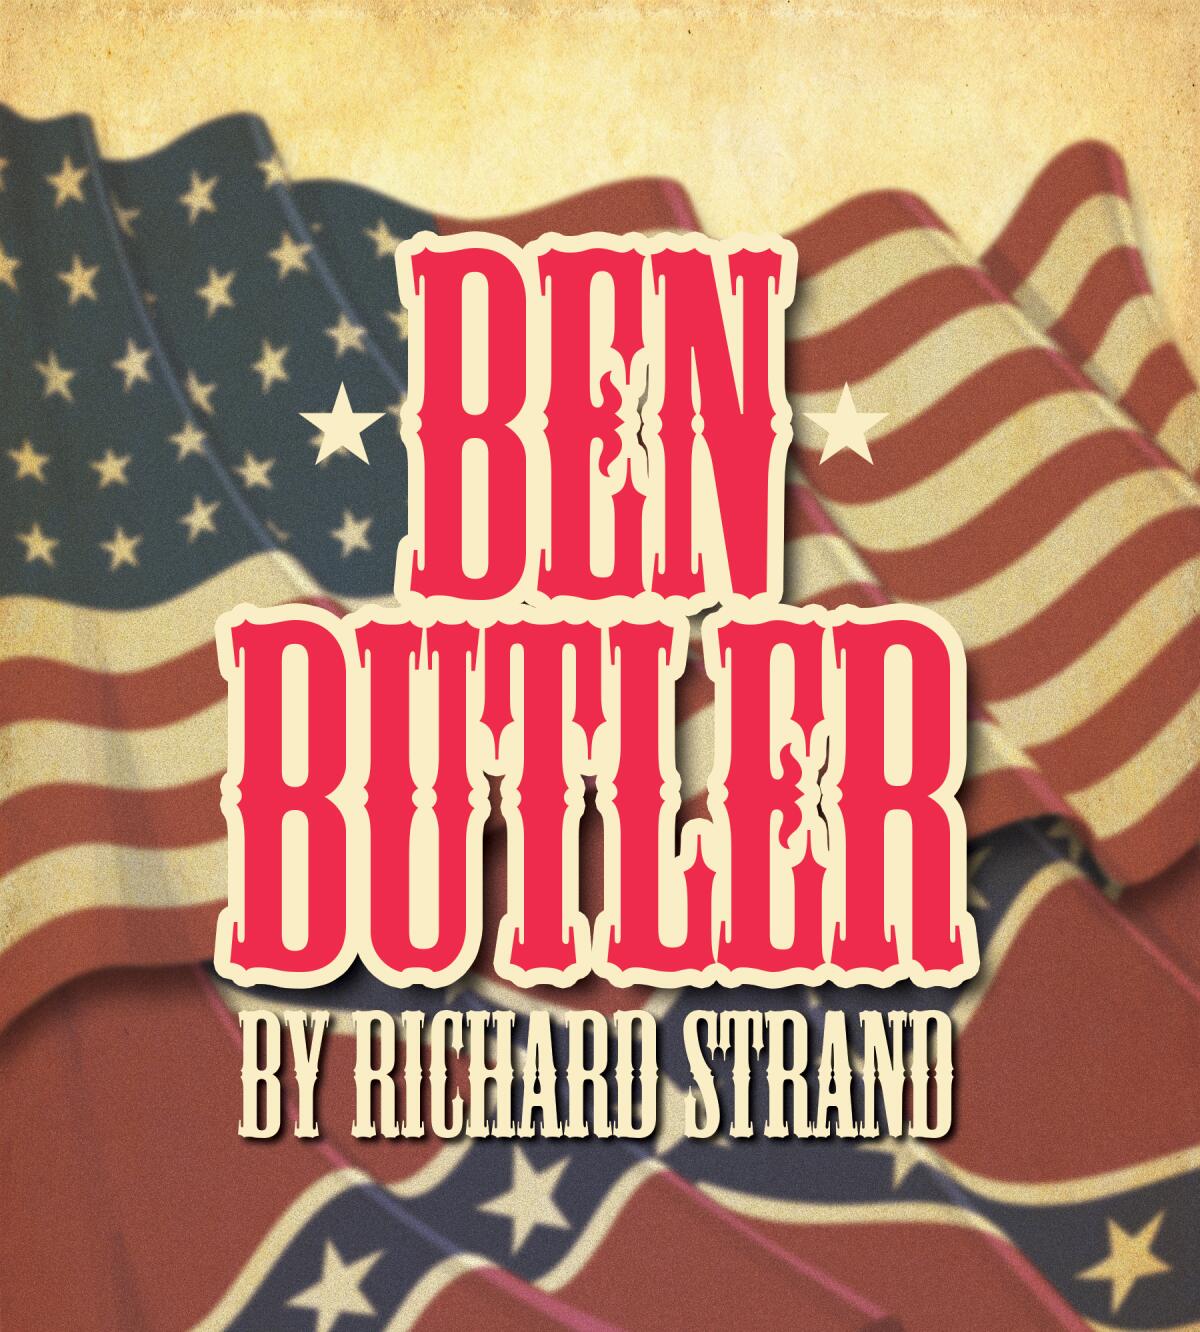 Ben Butler performs live on stage at North Coast Rep from Oct. 20 through Nov. 14.